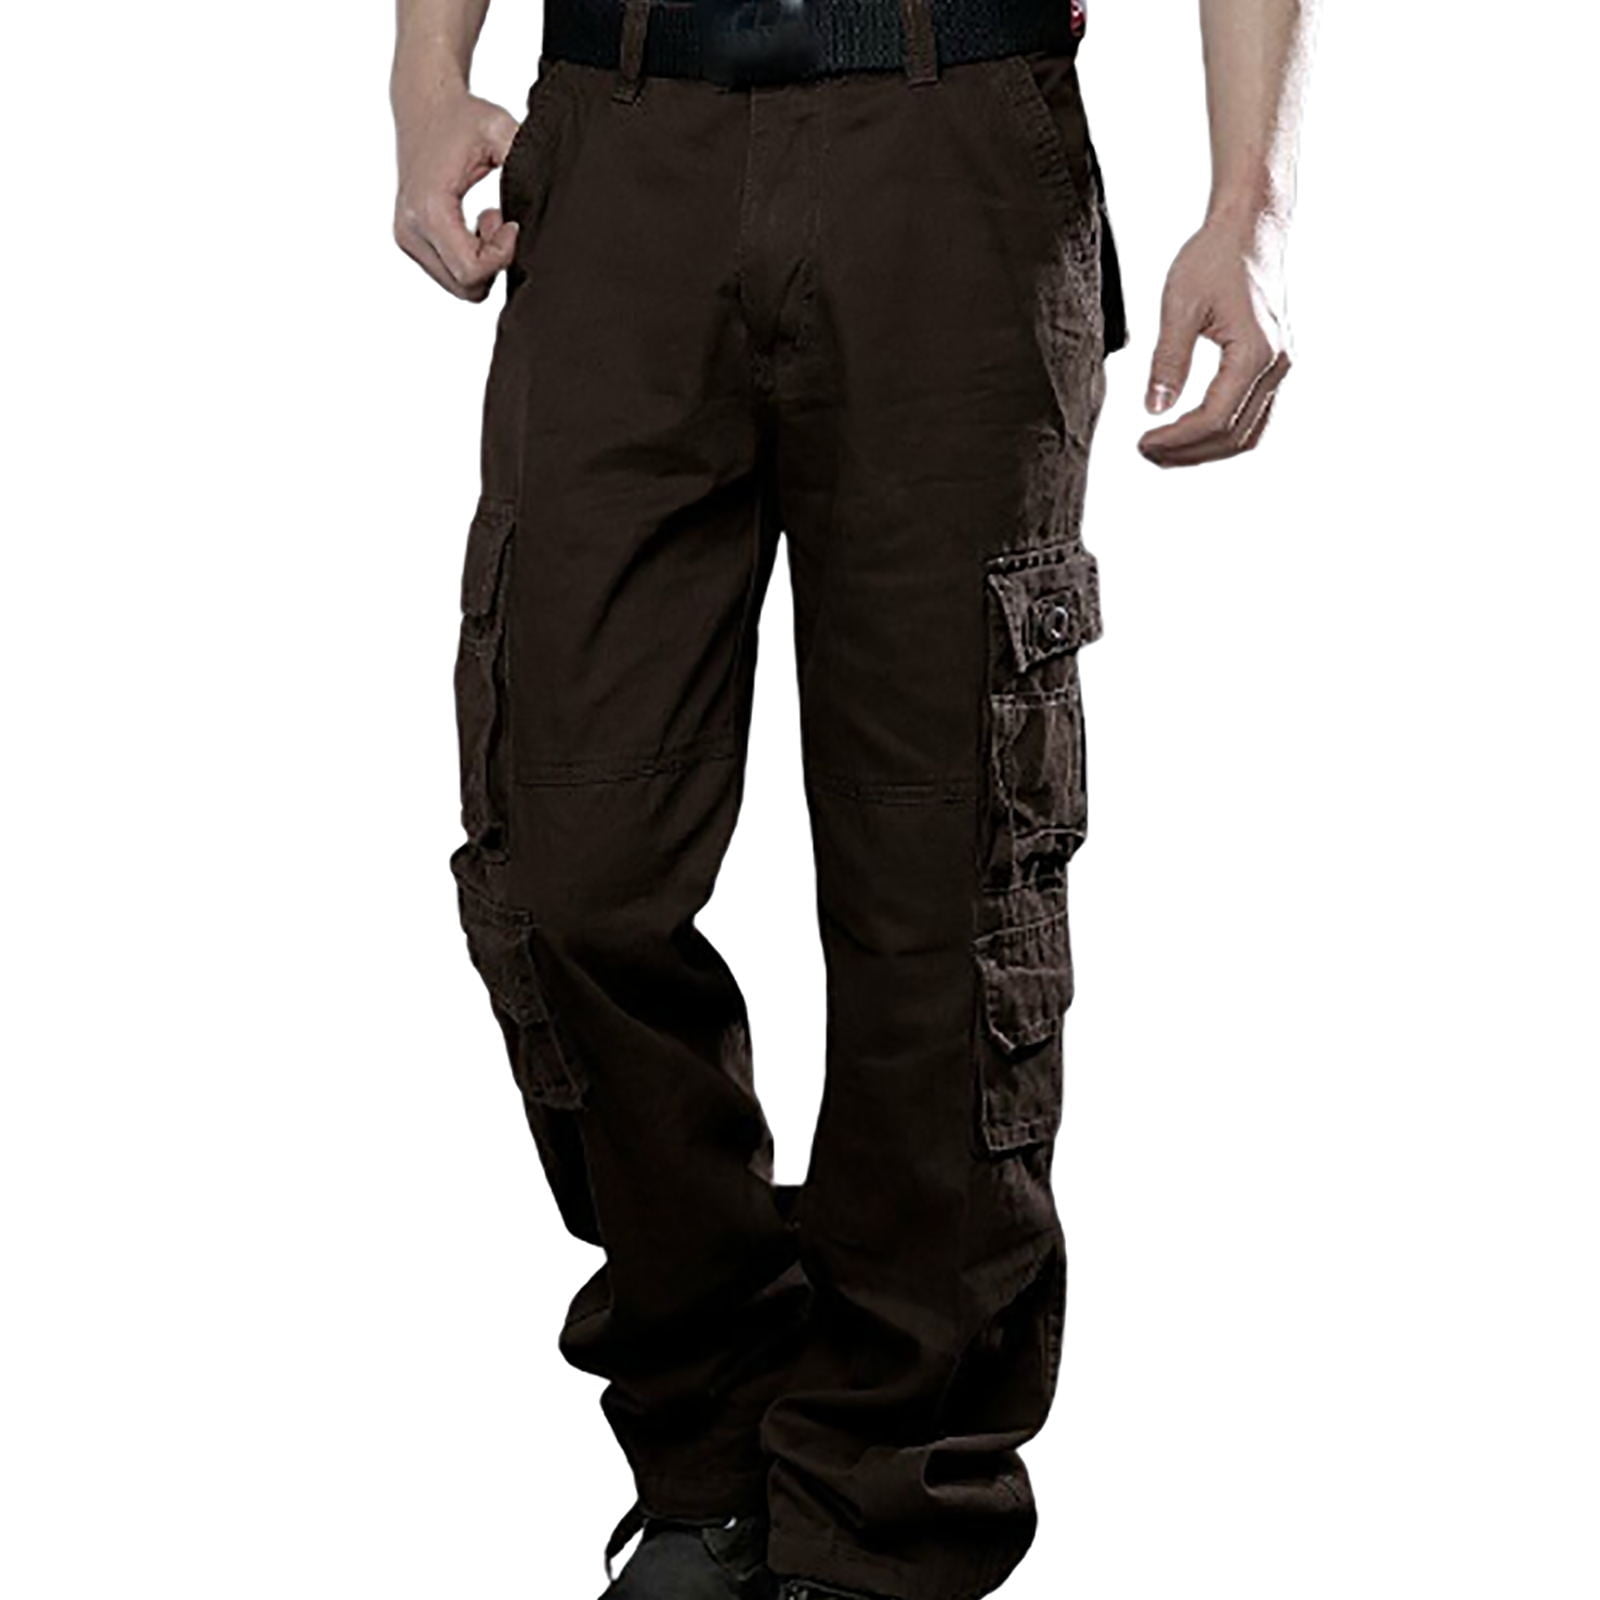 How to purchase police tactical pants